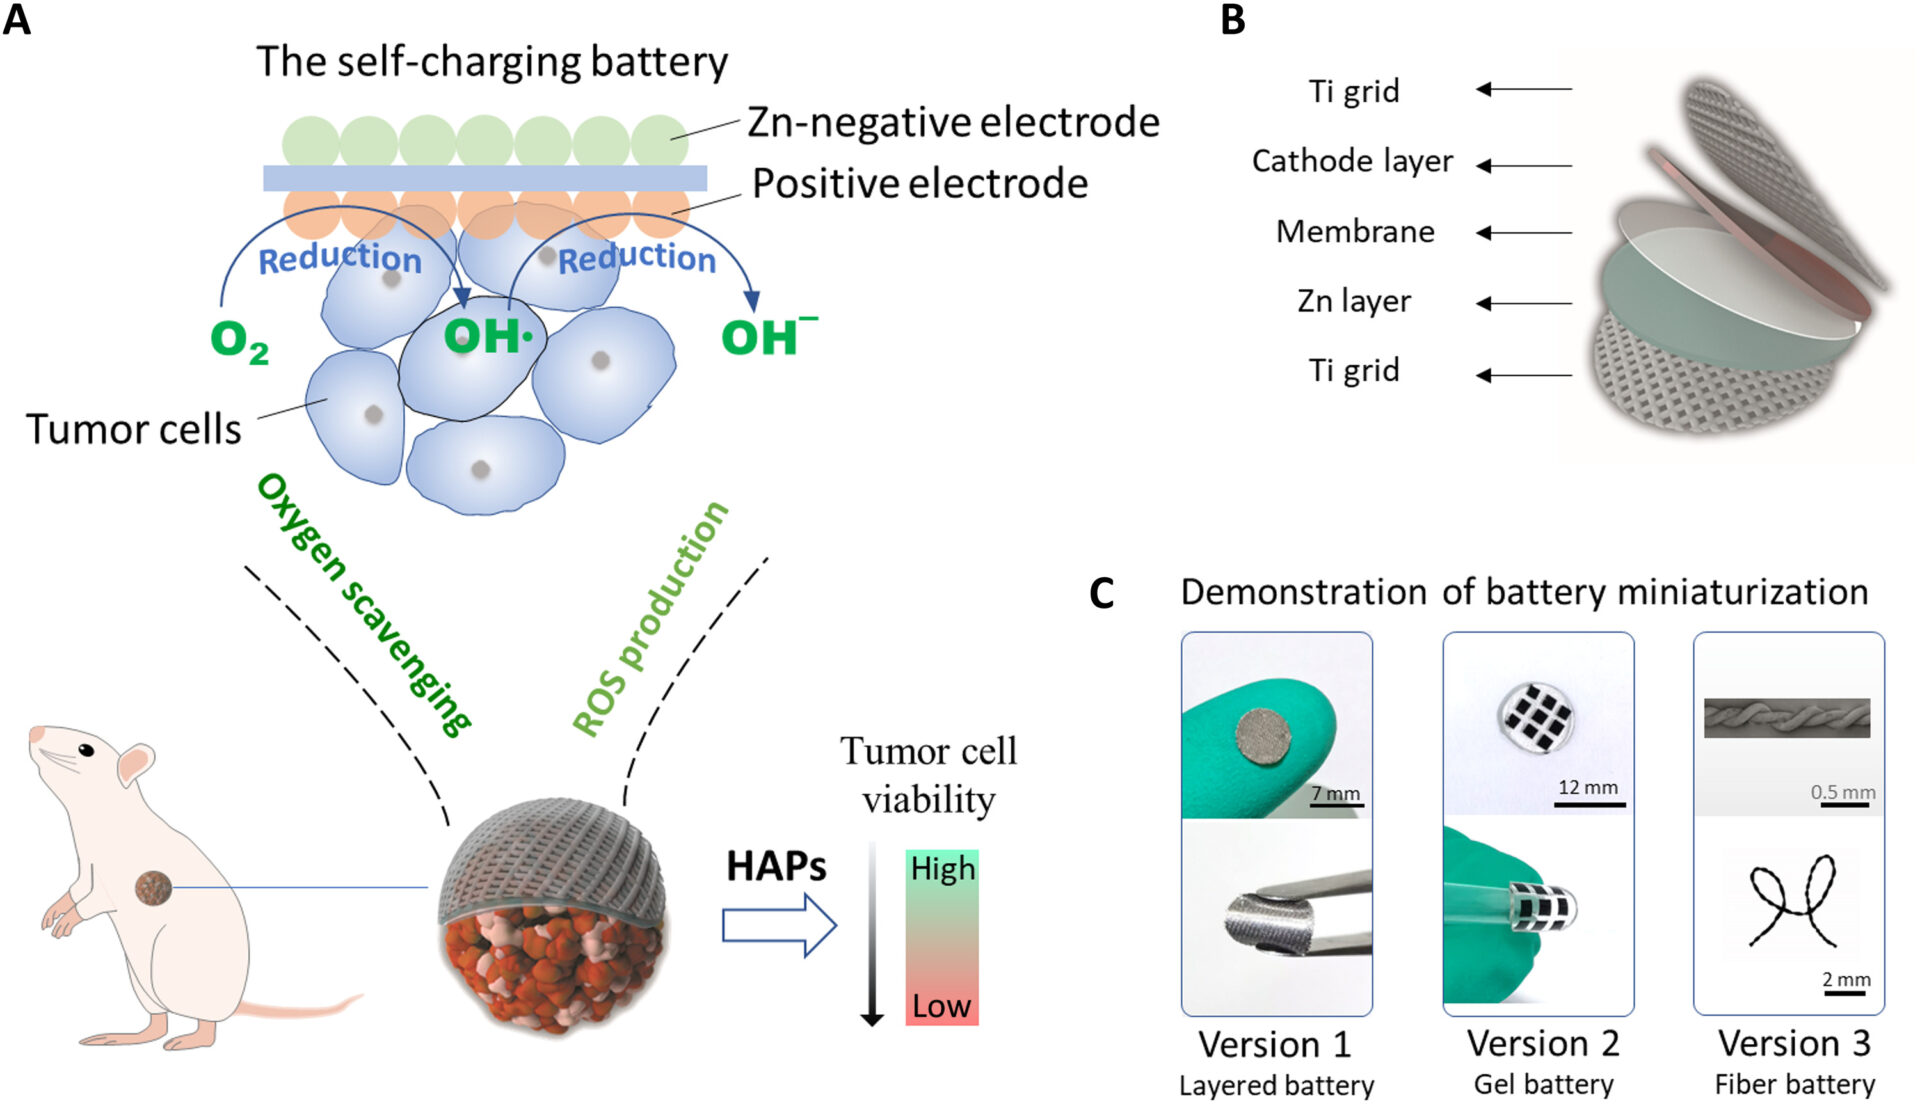 The rationale of the self-charging battery for tumor therapy. (A) Positive electrode material of the battery in the discharging mode is able to effectively reduce the oxygen and results in the production of ROS and hydroxyl ion. With the persistent consumption of oxygen, sustained hypoxia environment can be created, which is able to make full use of HAPs to kill tumor cells. (B) Demonstration of structure of the self-charging battery. (C) Different battery miniaturization approaches are presented, including layered battery (version 1), gel battery (version 2), and fiber battery (version 3).